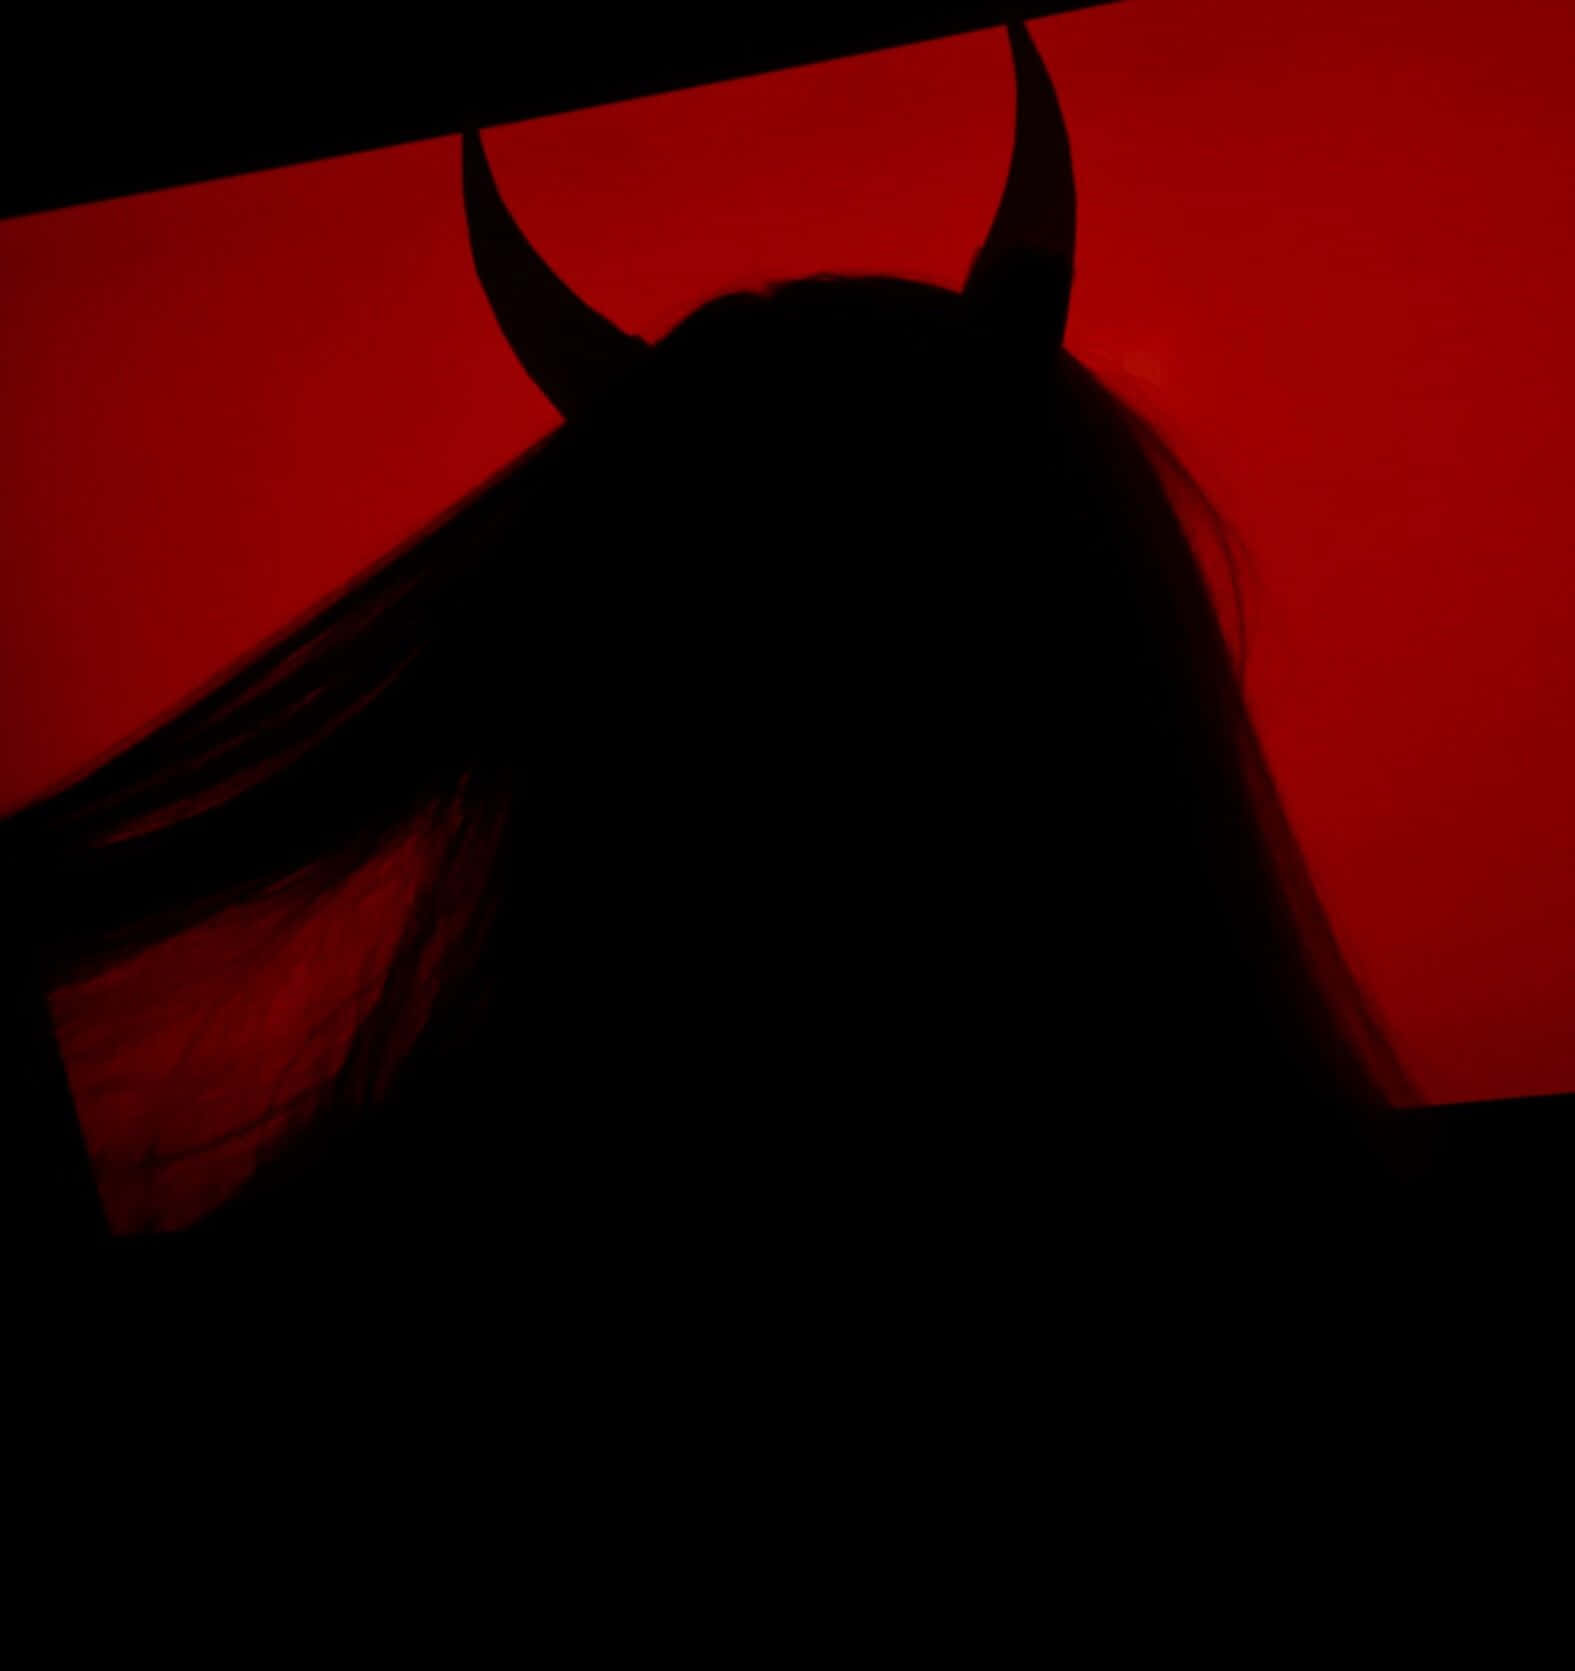 A Woman's Head Is Silhouetted Against A Red Background Wallpaper